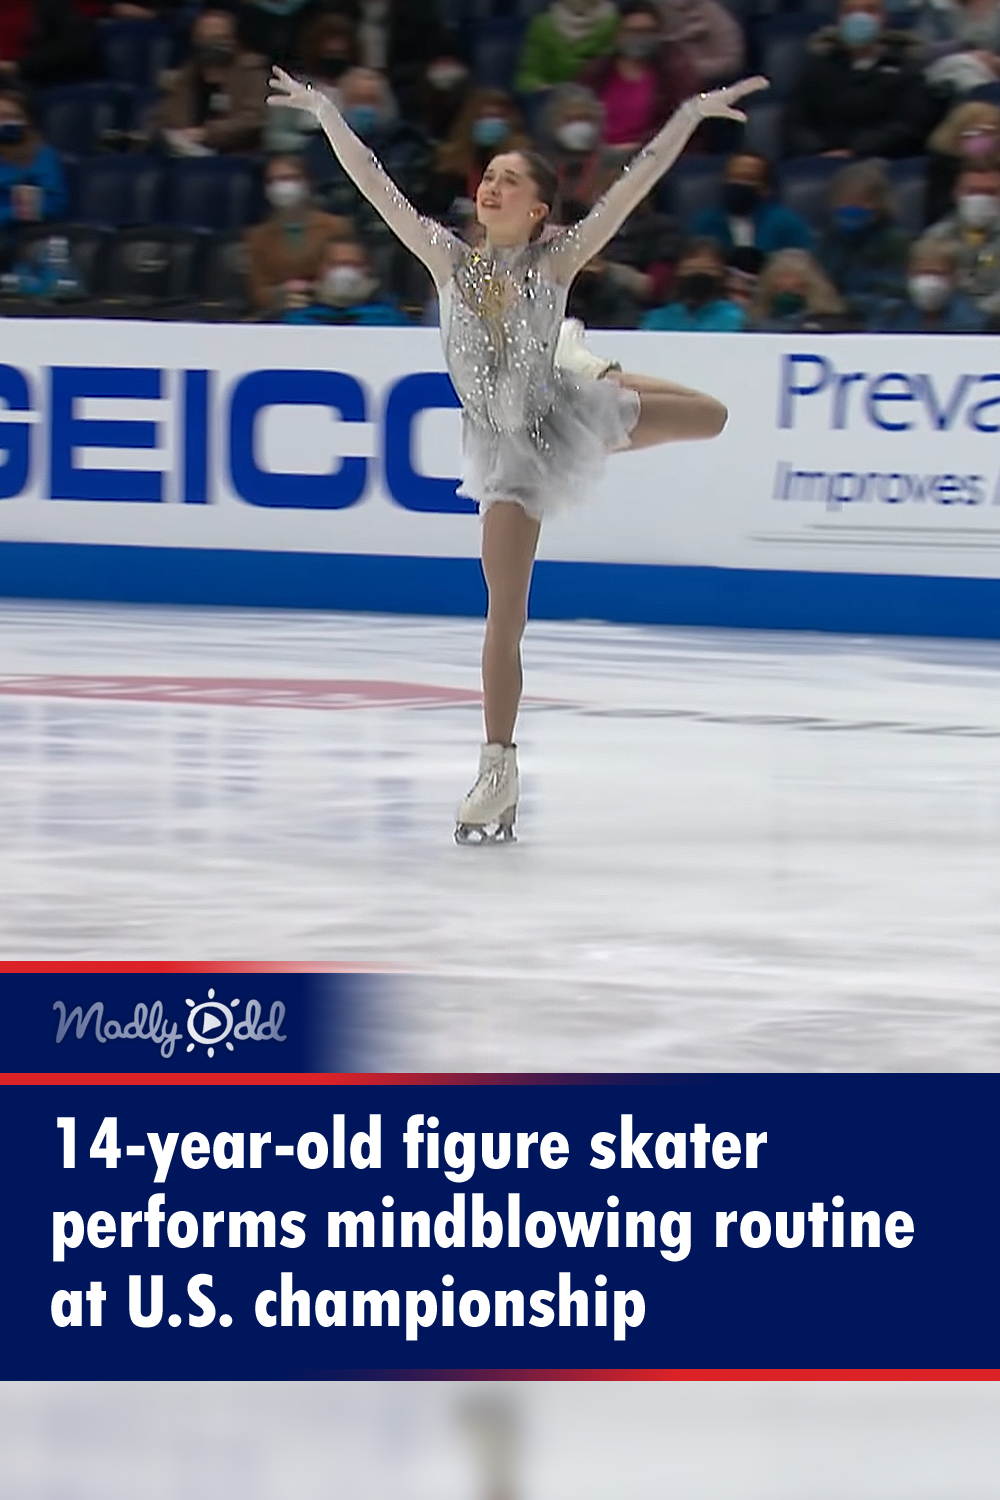 14-year-old figure skater performs mindblowing routine at U.S. championship